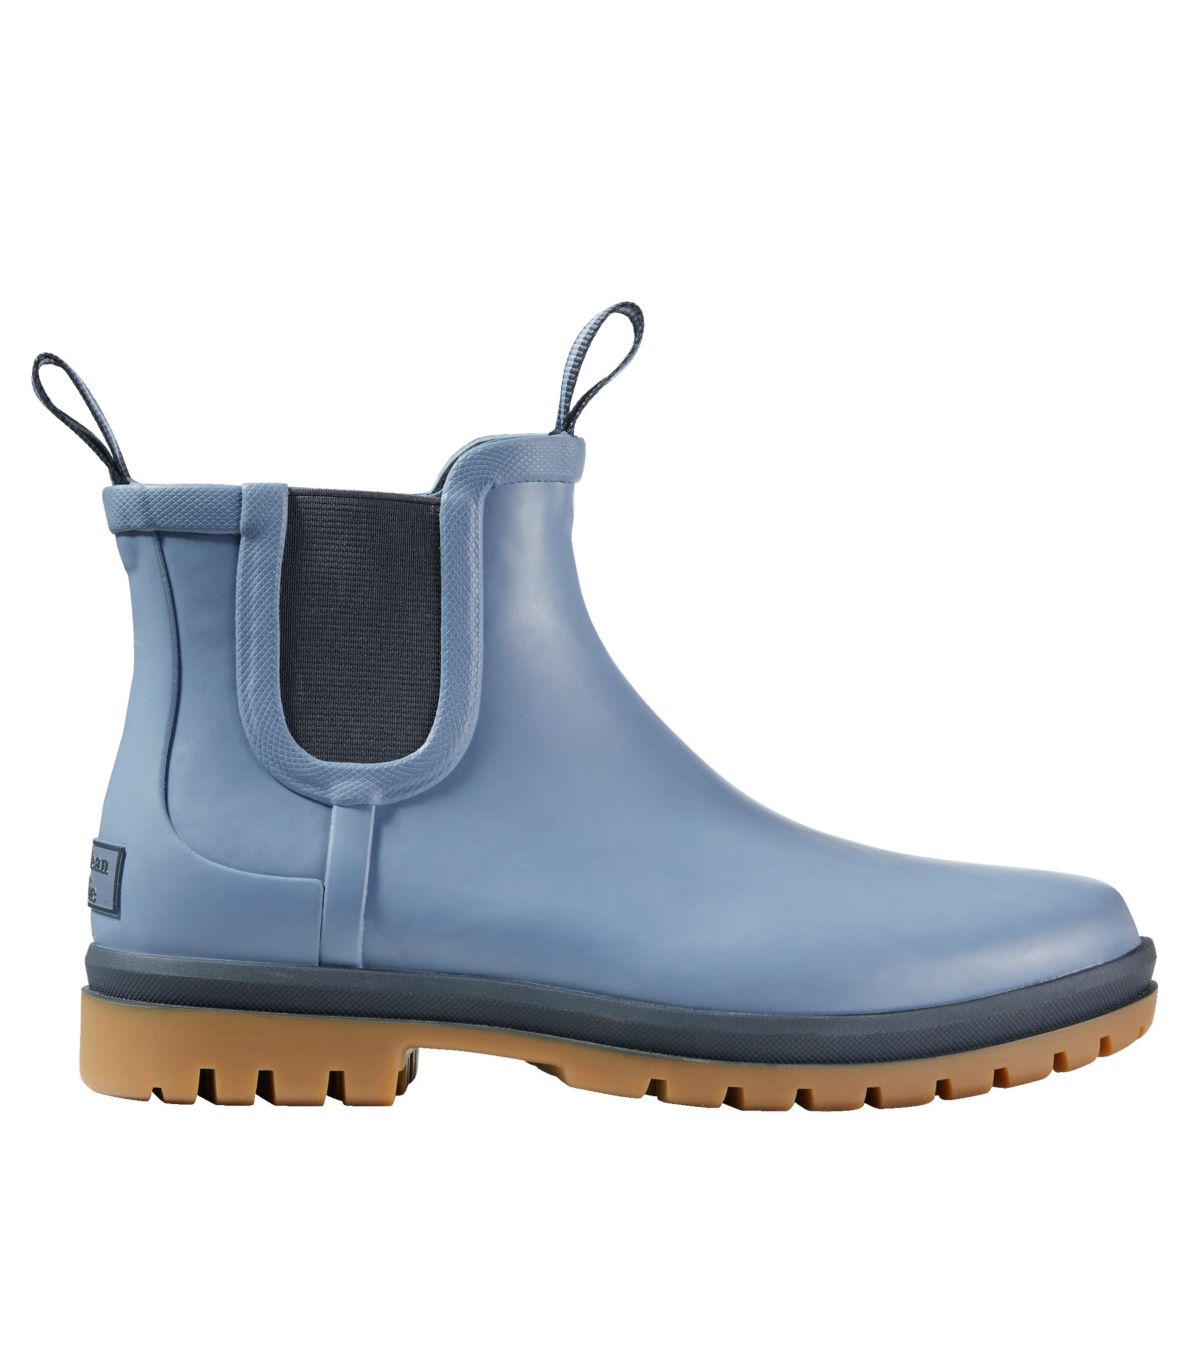 Women's Rugged Wellie Chelsea Boots